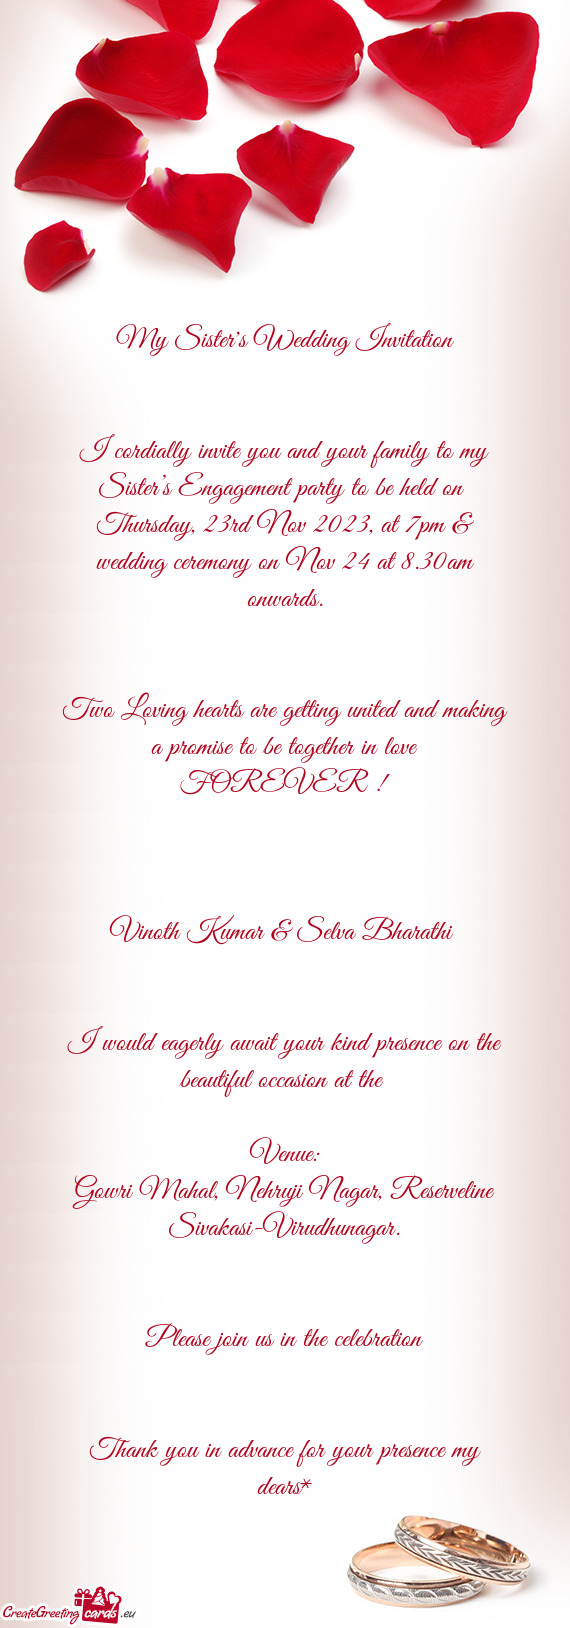 I cordially invite you and your family to my Sister’s Engagement party to be held on